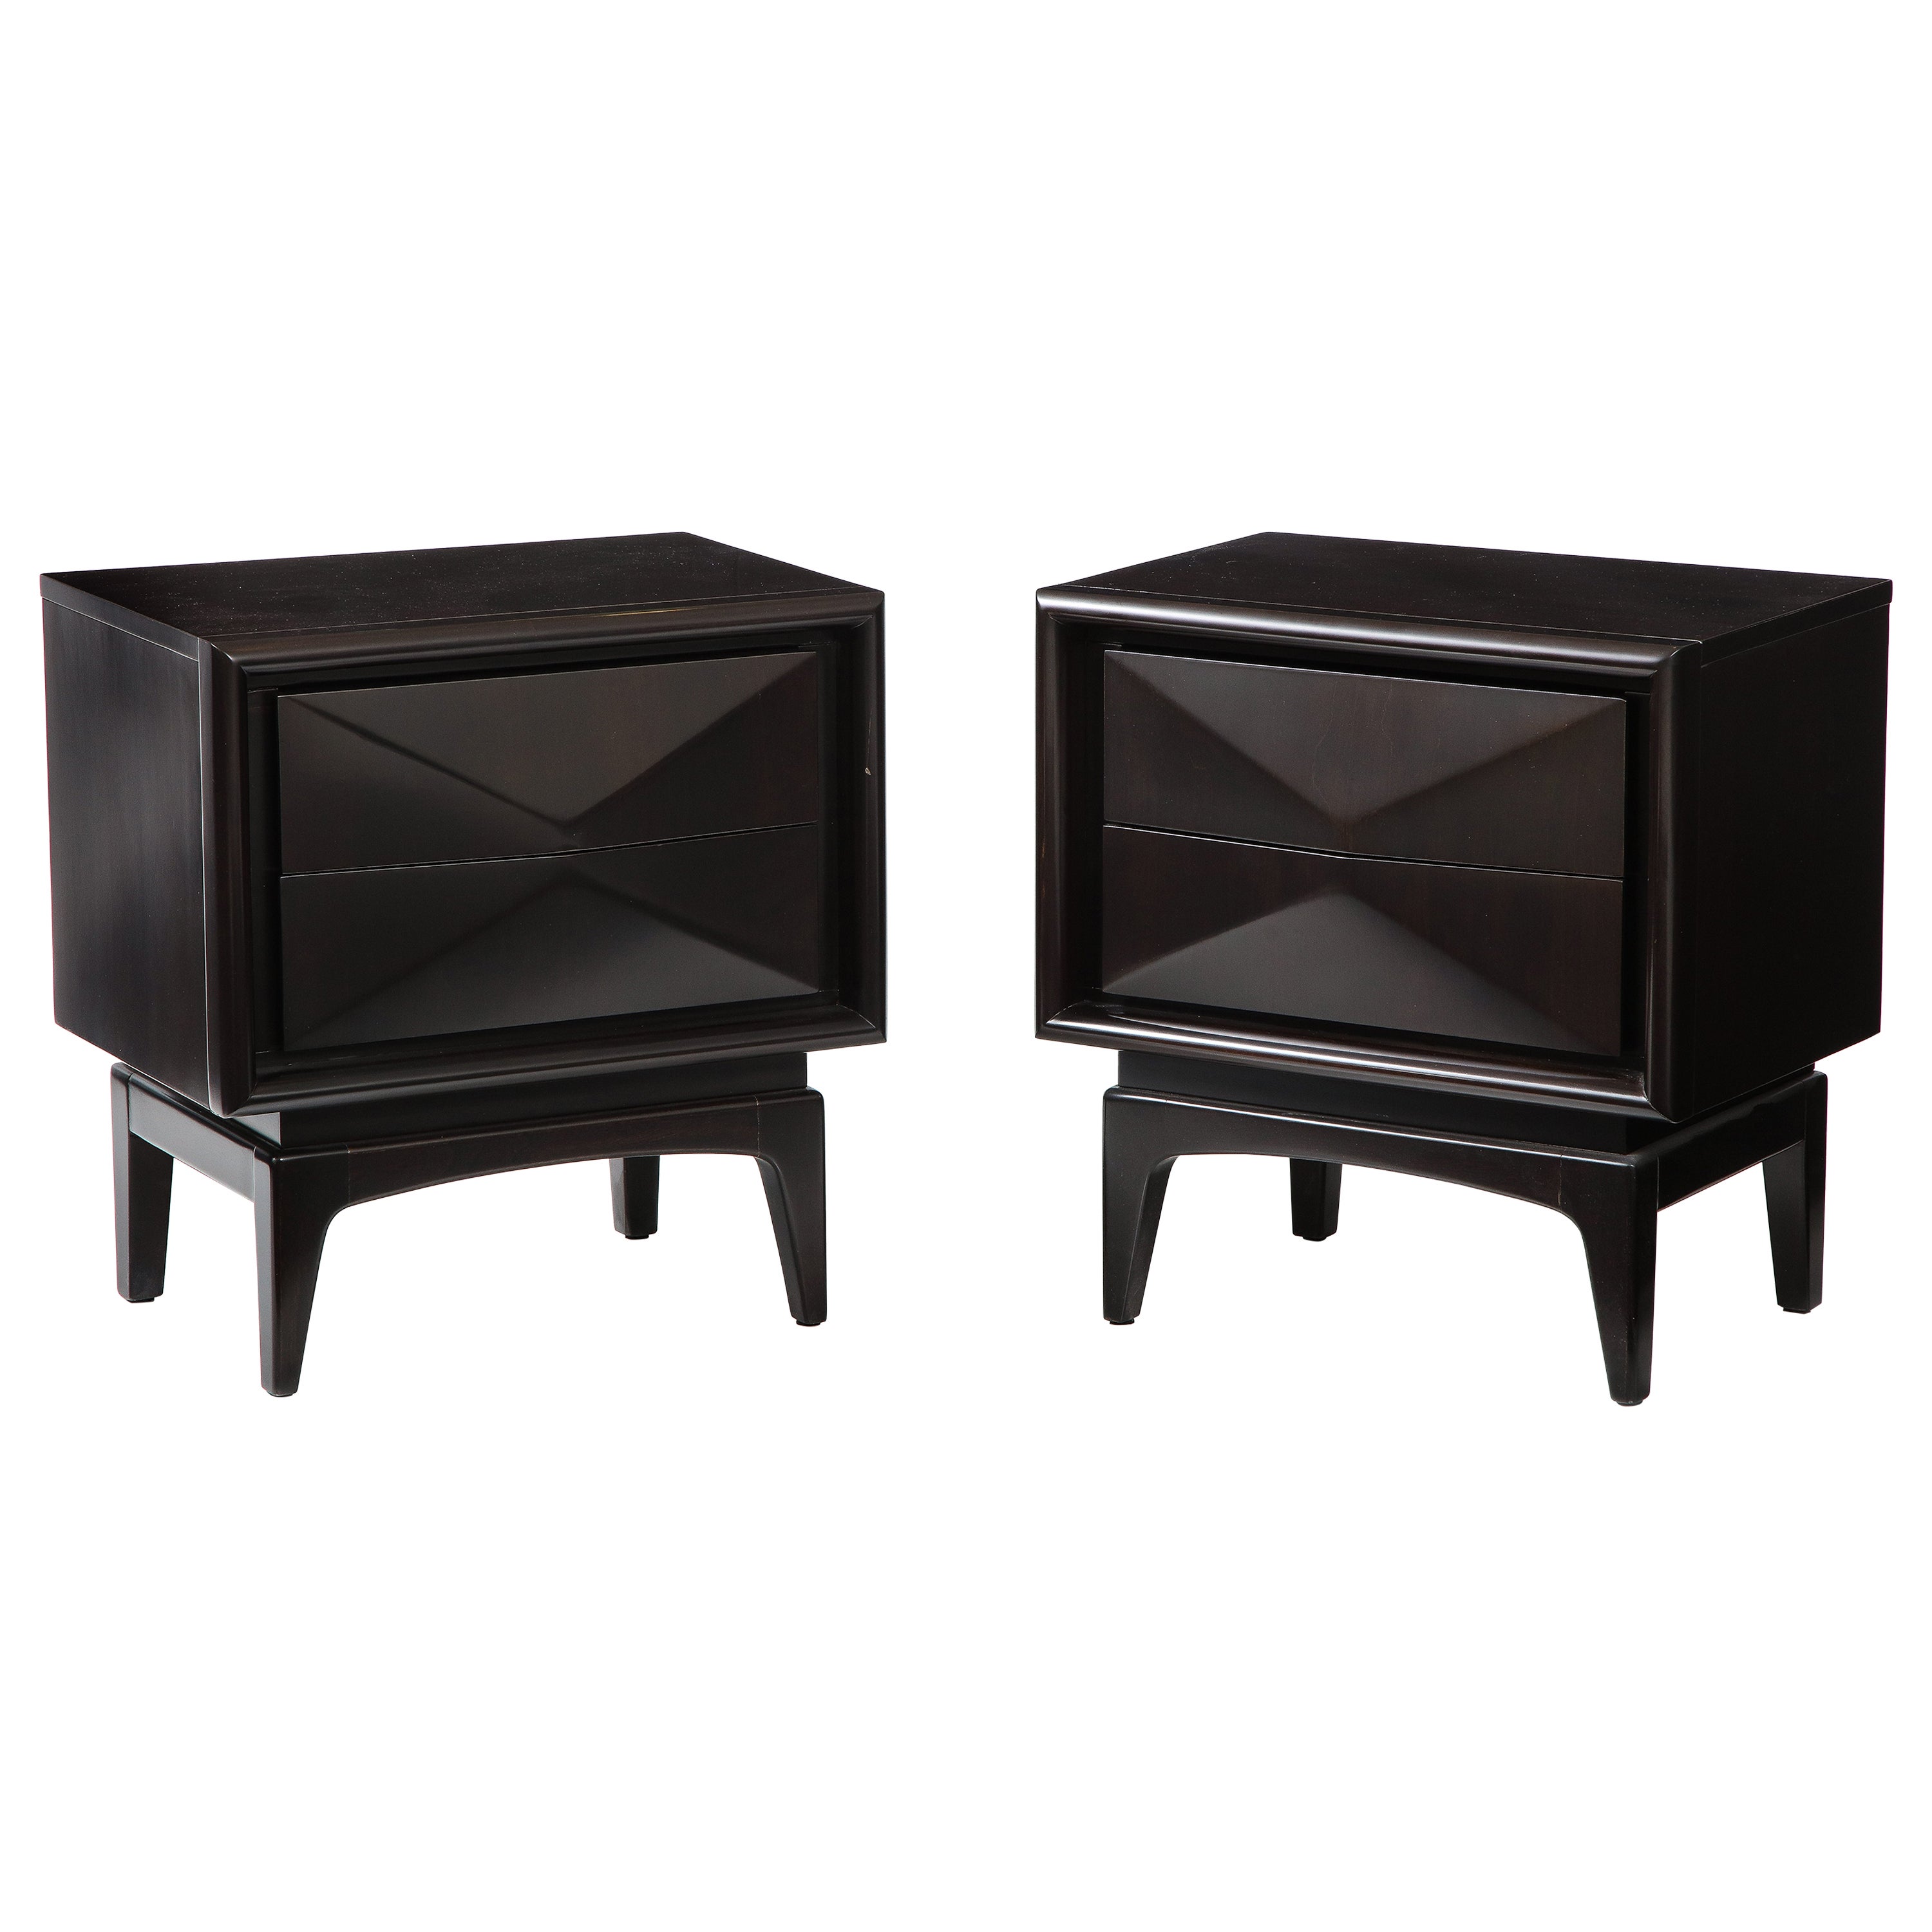 United Diamond Front Walnut Night Stands For Sale